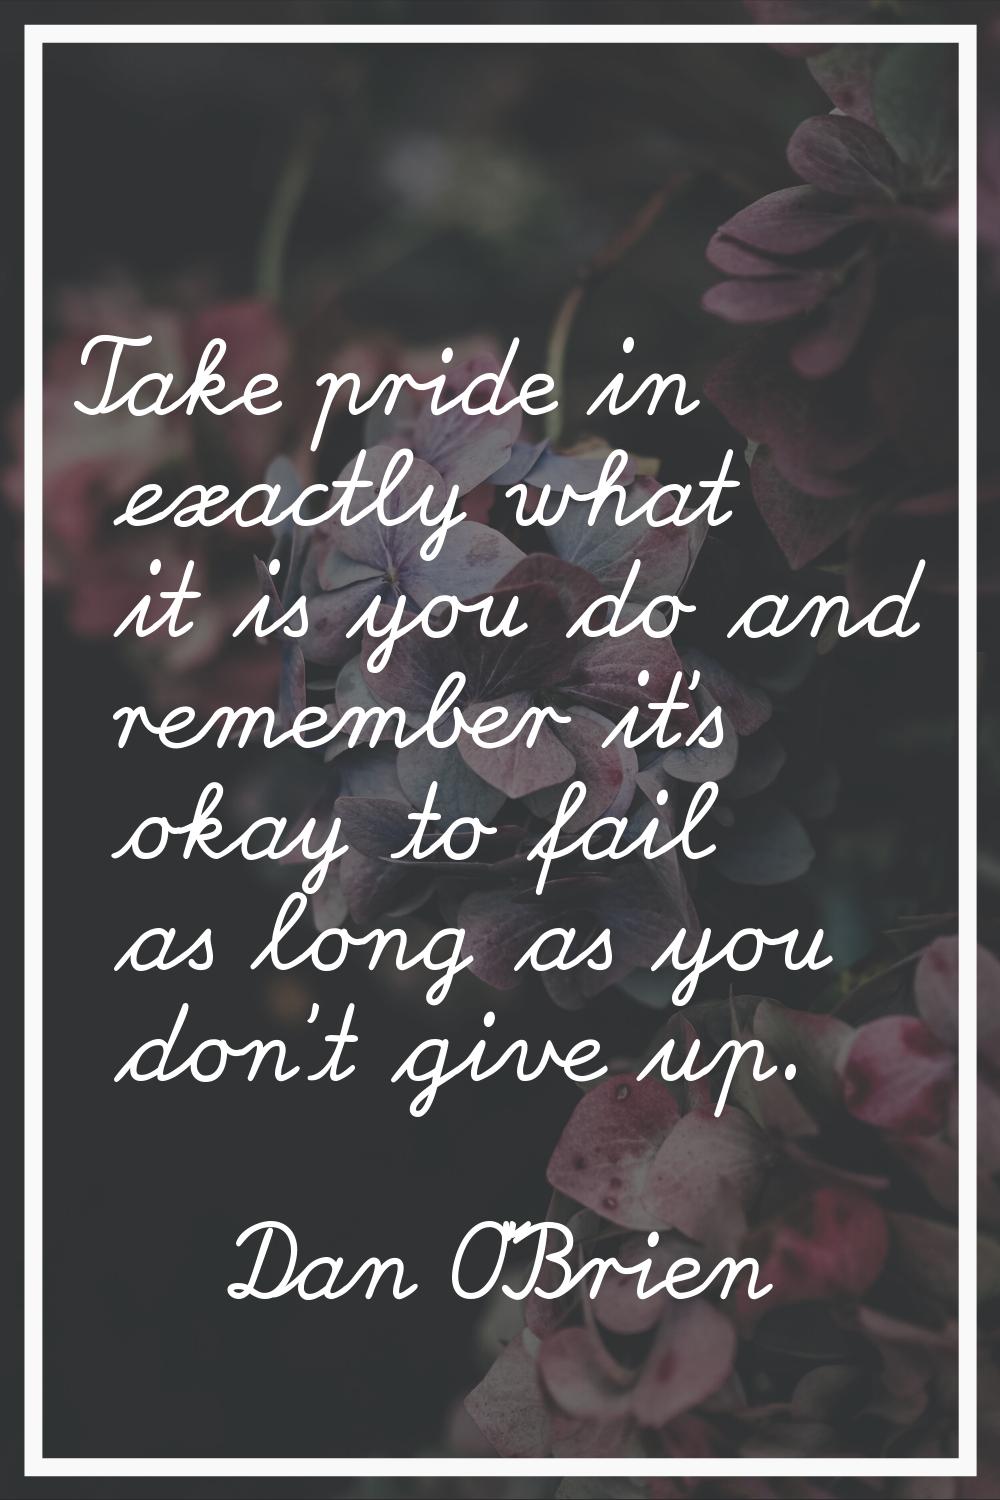 Take pride in exactly what it is you do and remember it's okay to fail as long as you don't give up